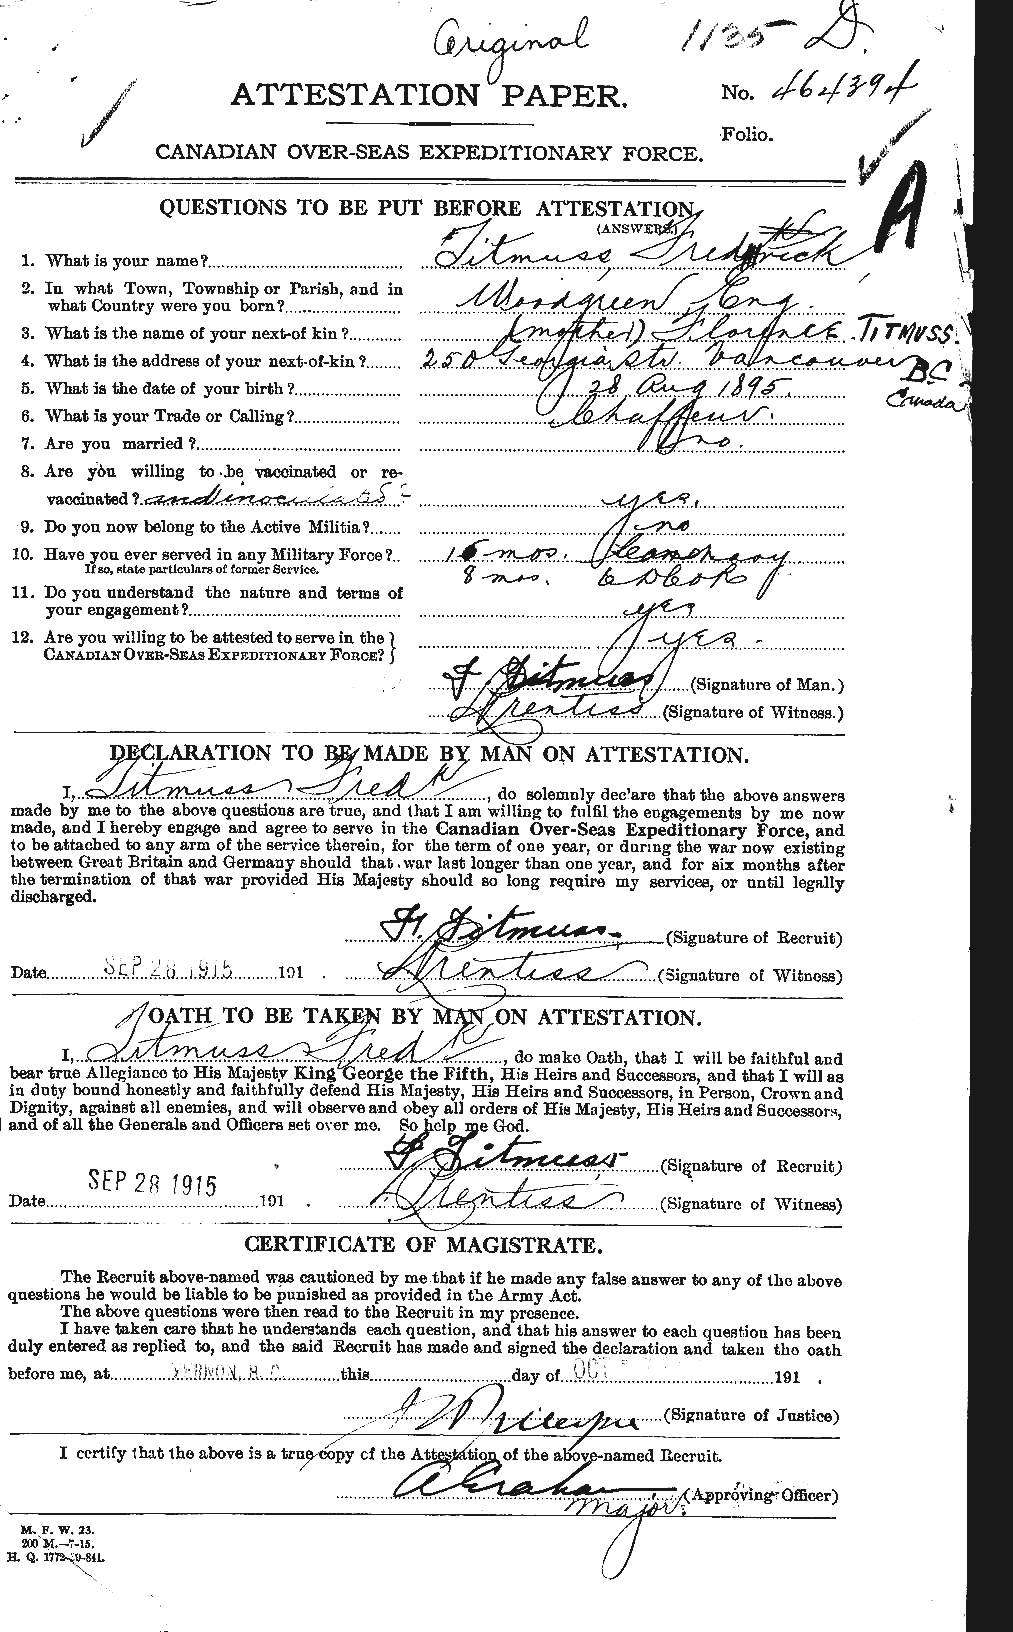 Personnel Records of the First World War - CEF 634911a